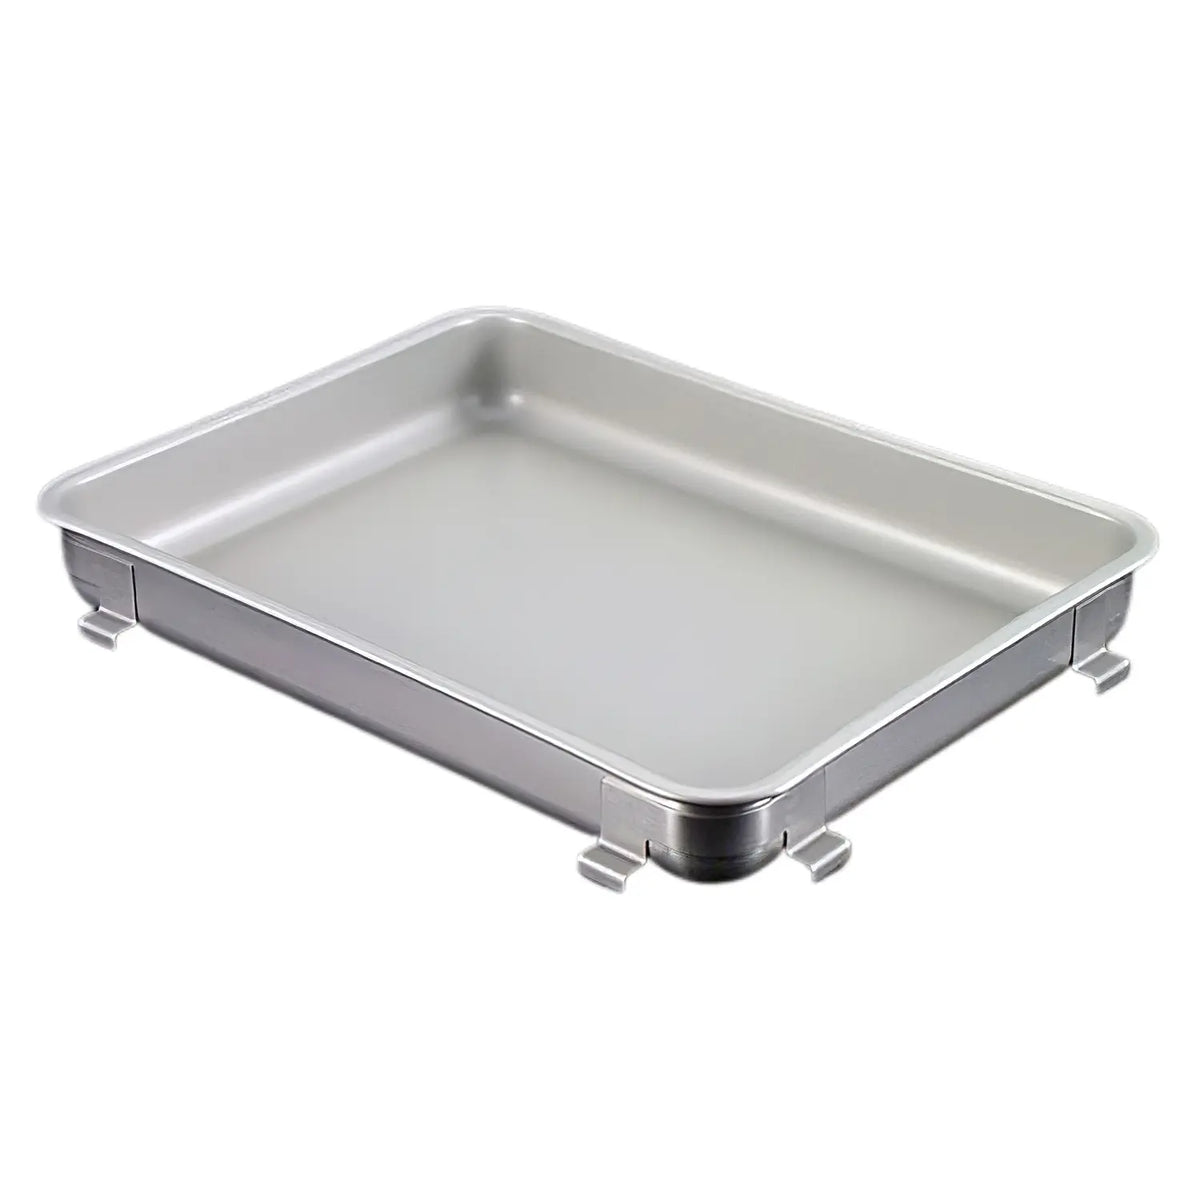 IKD Stainless Steel Antibacterial Fluororesin-coated Stackable Tray for Perishables